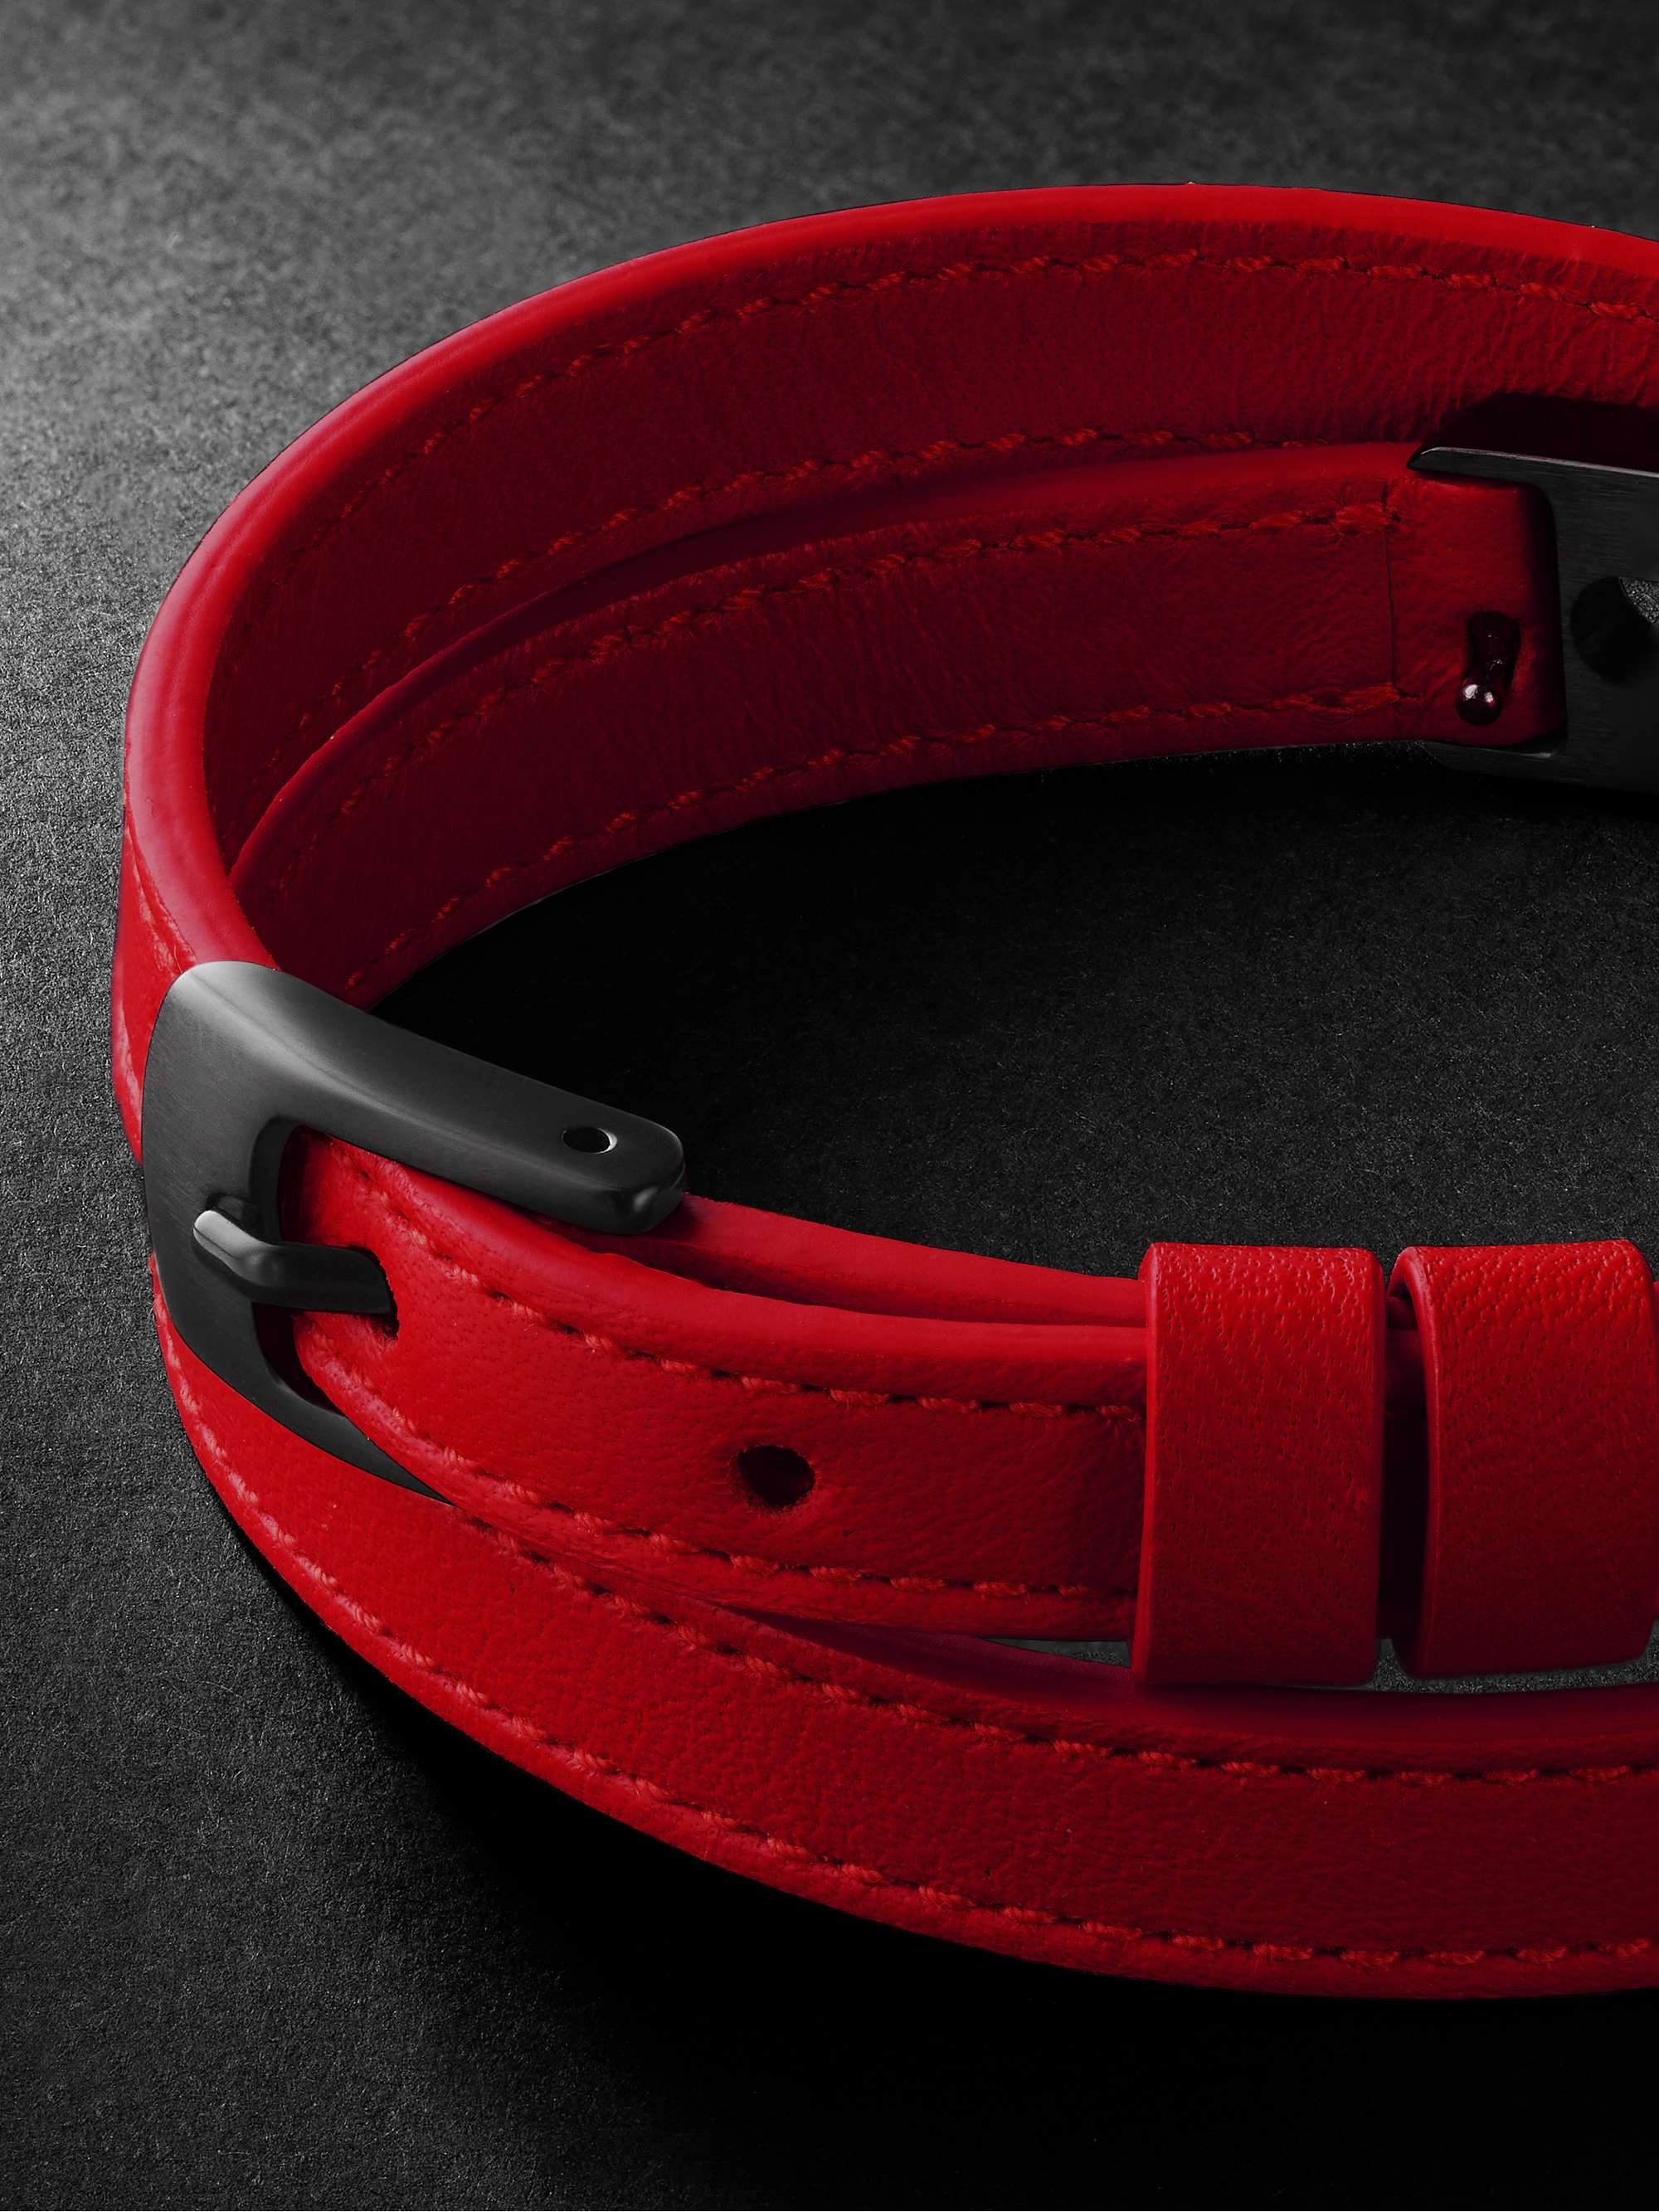 Diamond And Leather Bracelet in Red for Men Messika My Move Blackened Titanium Mens Jewellery Bracelets 